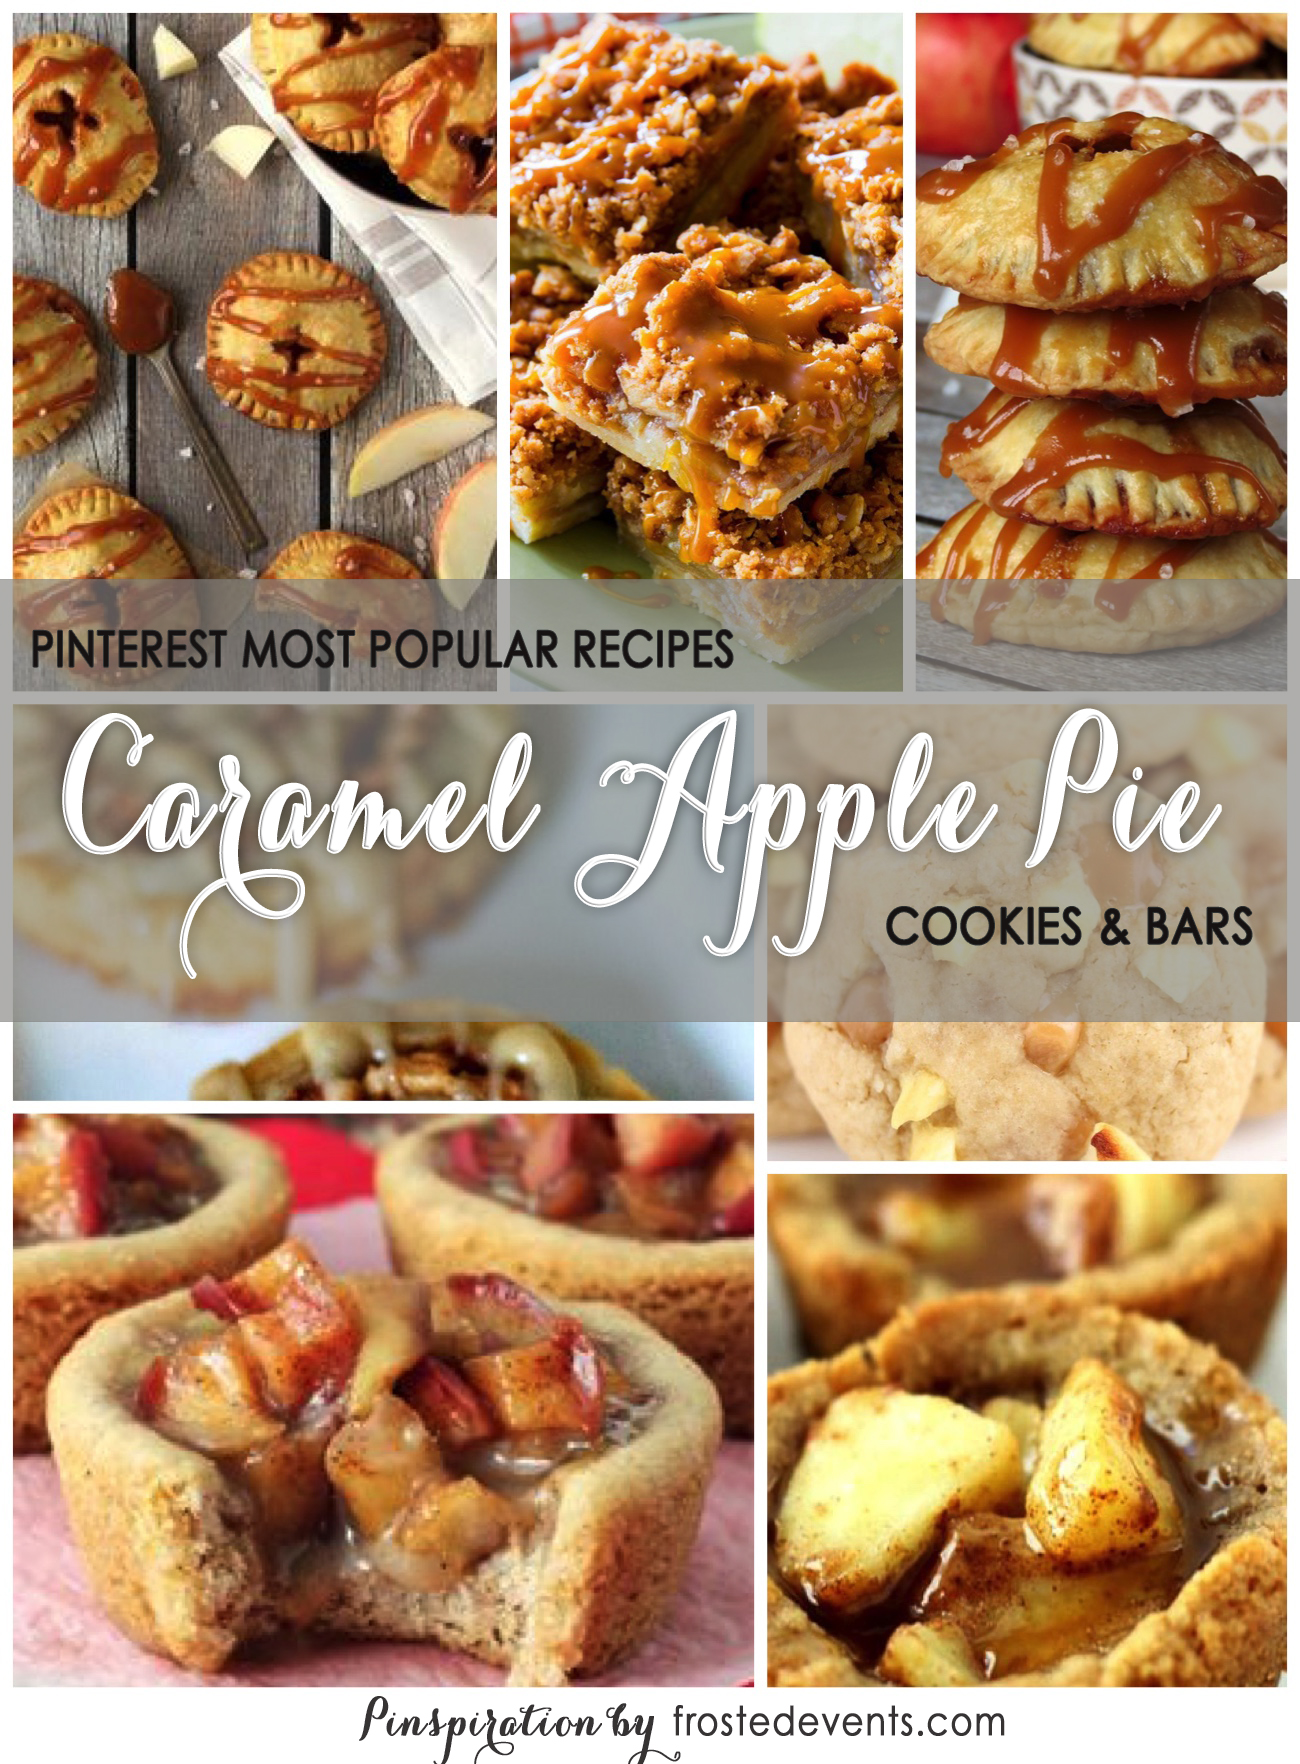 Caramel Apple Pie Cookies Recipes from Pinterest Most Popular frostedeventscom